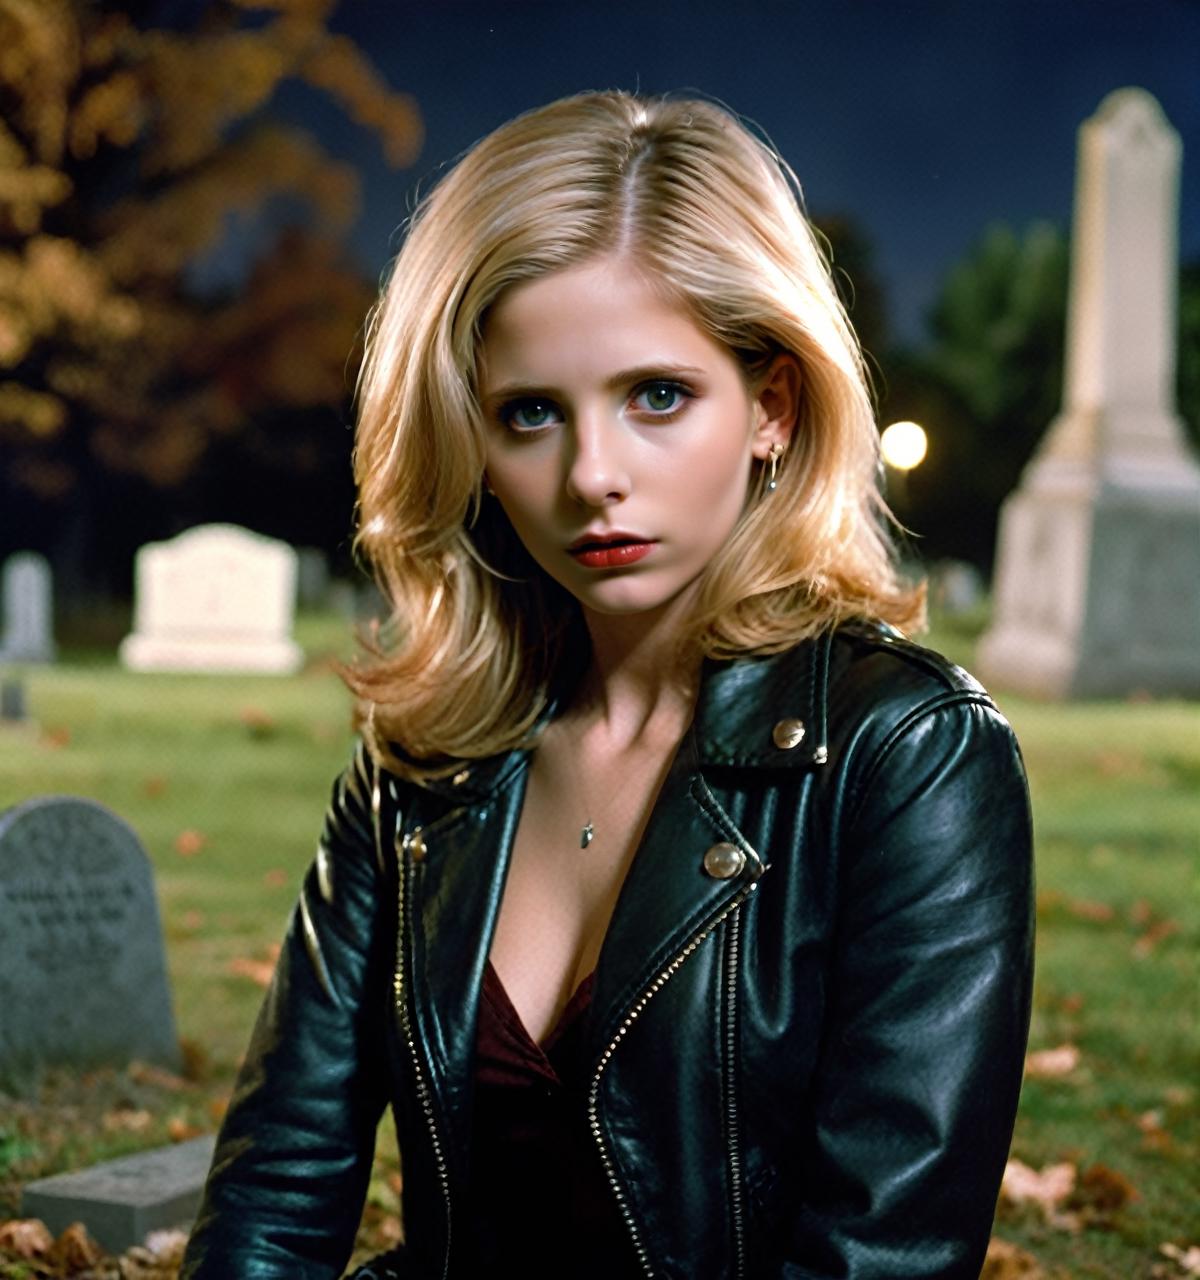 Nuclear SDXL - Buffy TheVampire Slayer ( from s01 ) - Sarah Michelle Gellar image by ai_degenx